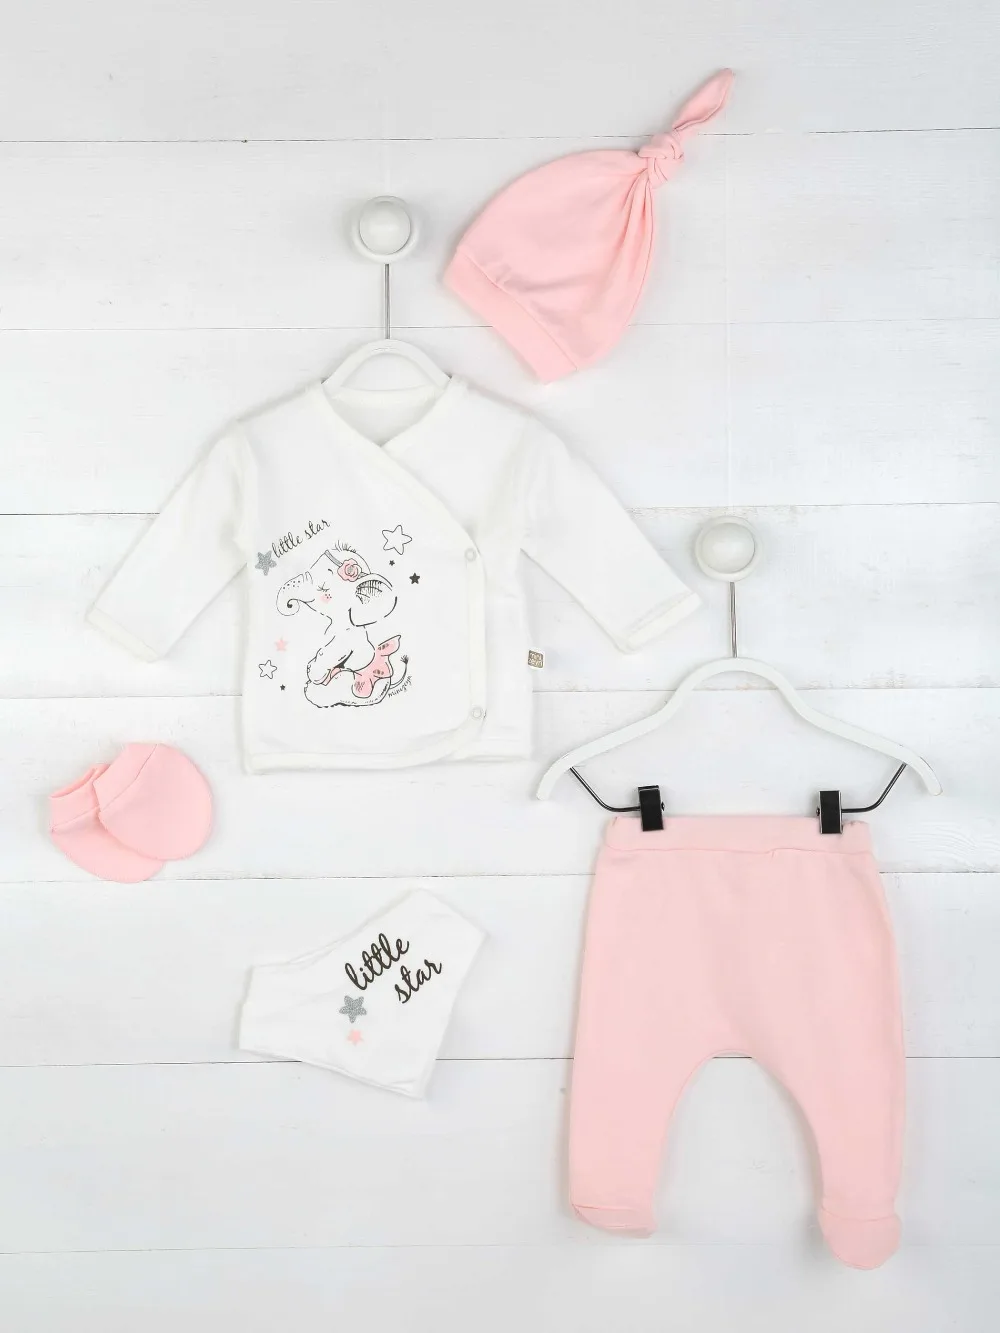 Girls Baby Boy Newborn Clothing 5-Piece set Cotton Fabric Baby Summer Clothes Gift Daily Casual Stylish Outfit Models